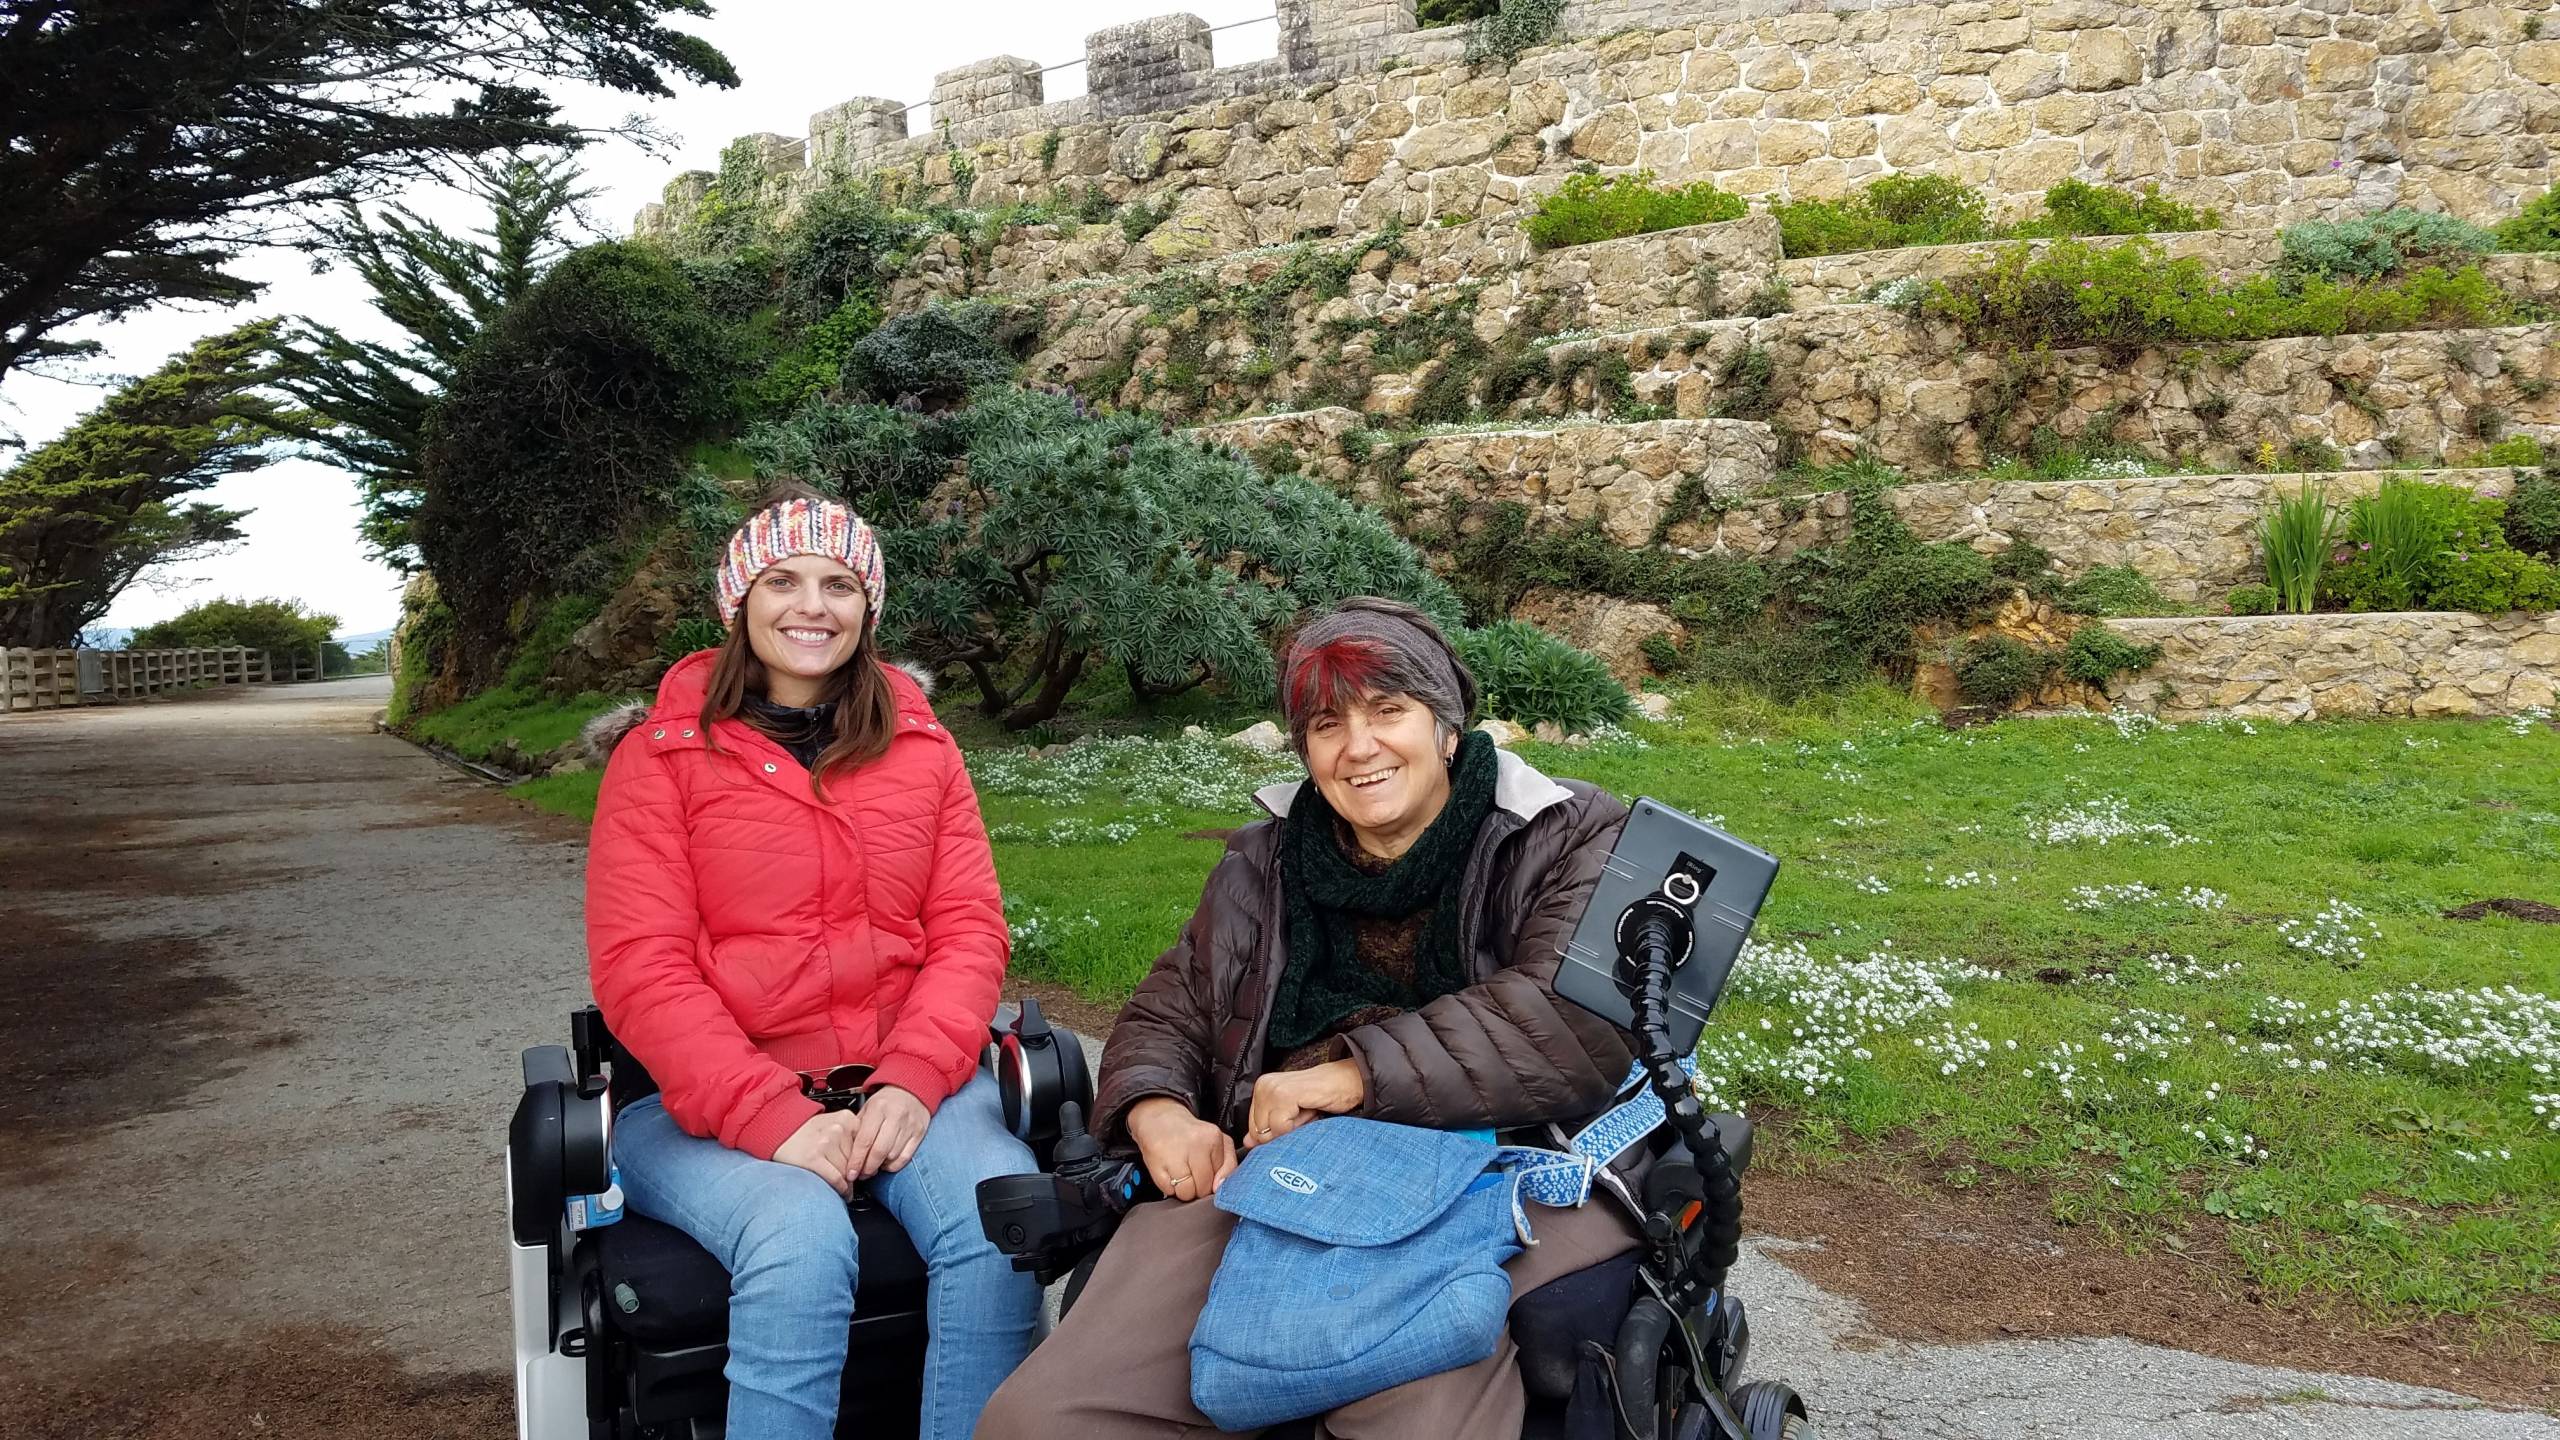 Two women with lighter skin and dark hair using wheelchairs are next to each other smiling against a backdrop of a fort, and trees. The woman on the left is wearing a red jacket. And the woman on the right is wearing a brown jacket holding a blue bag in her lap.